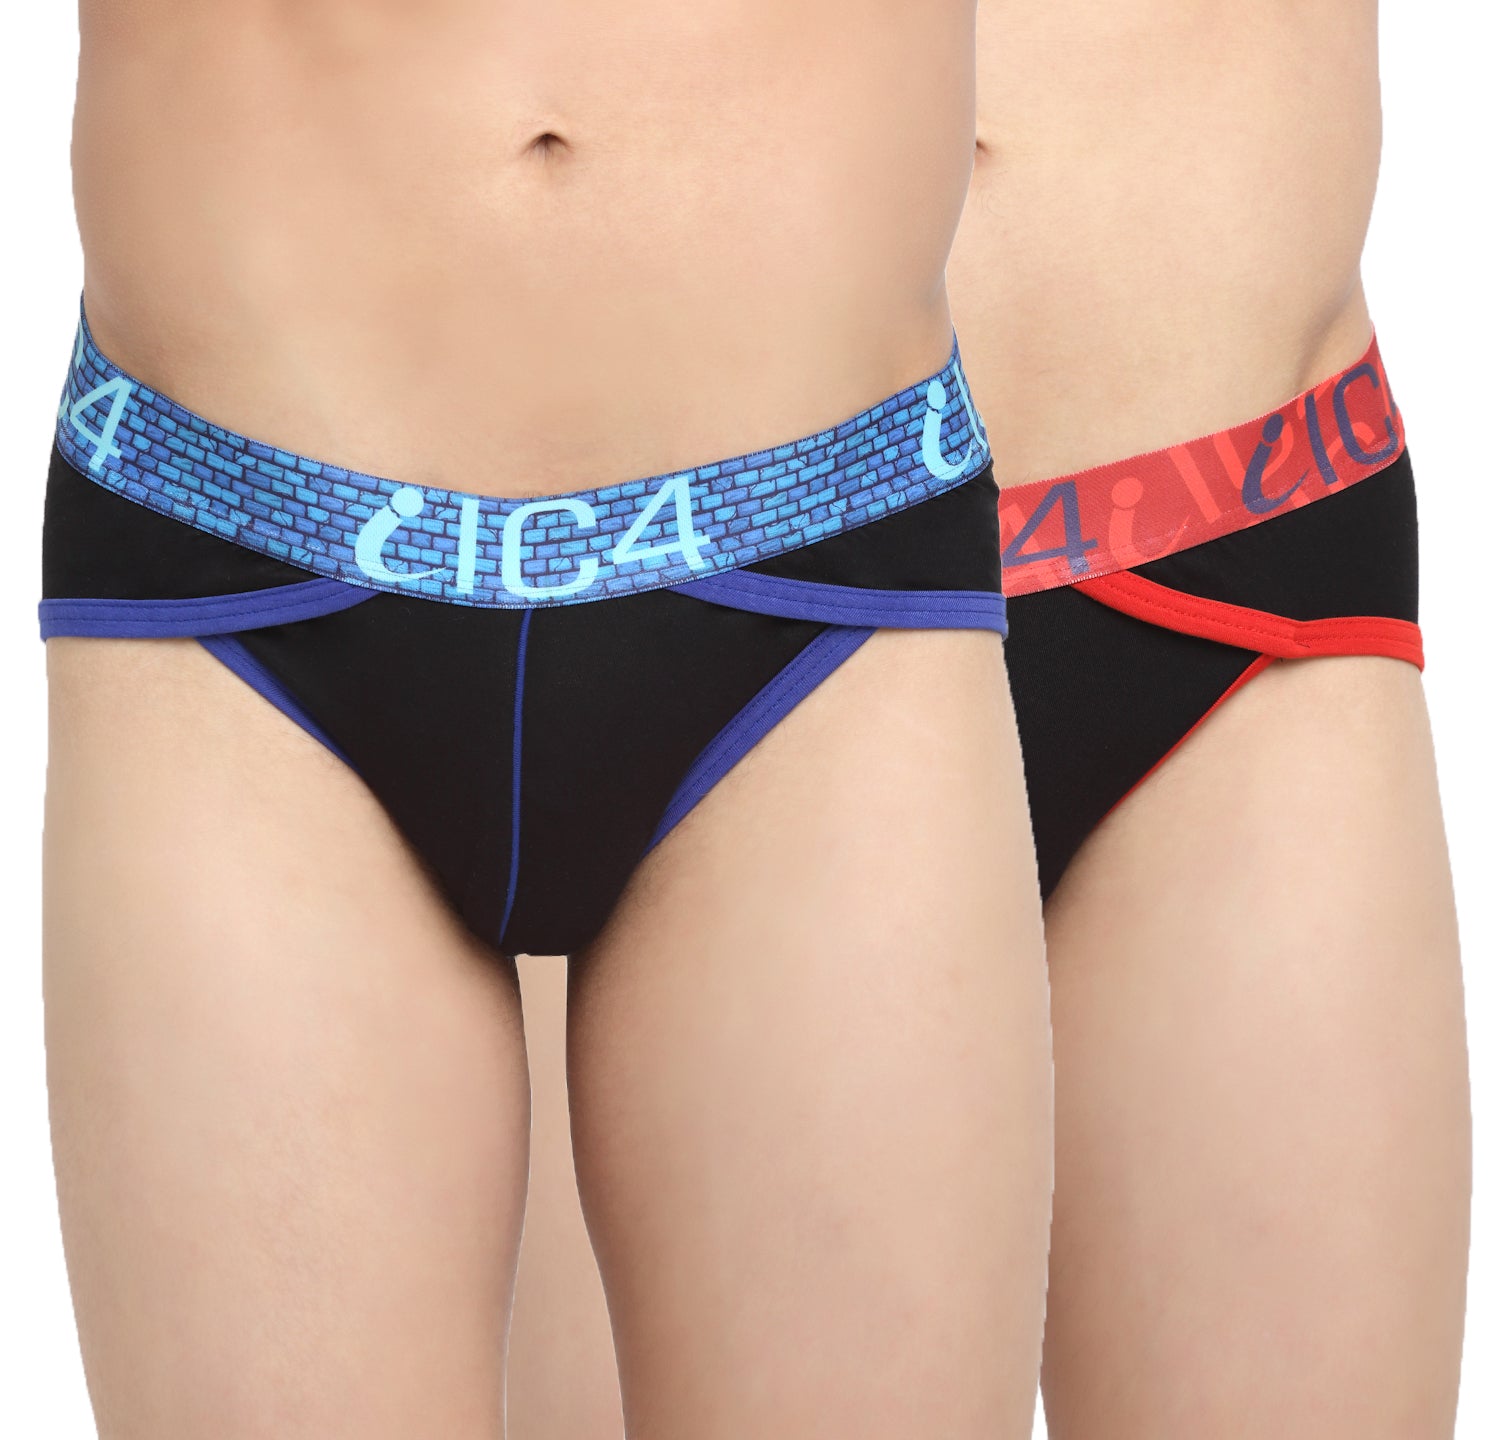 IC4 Men's Fashion Brief Combo Pack of 2